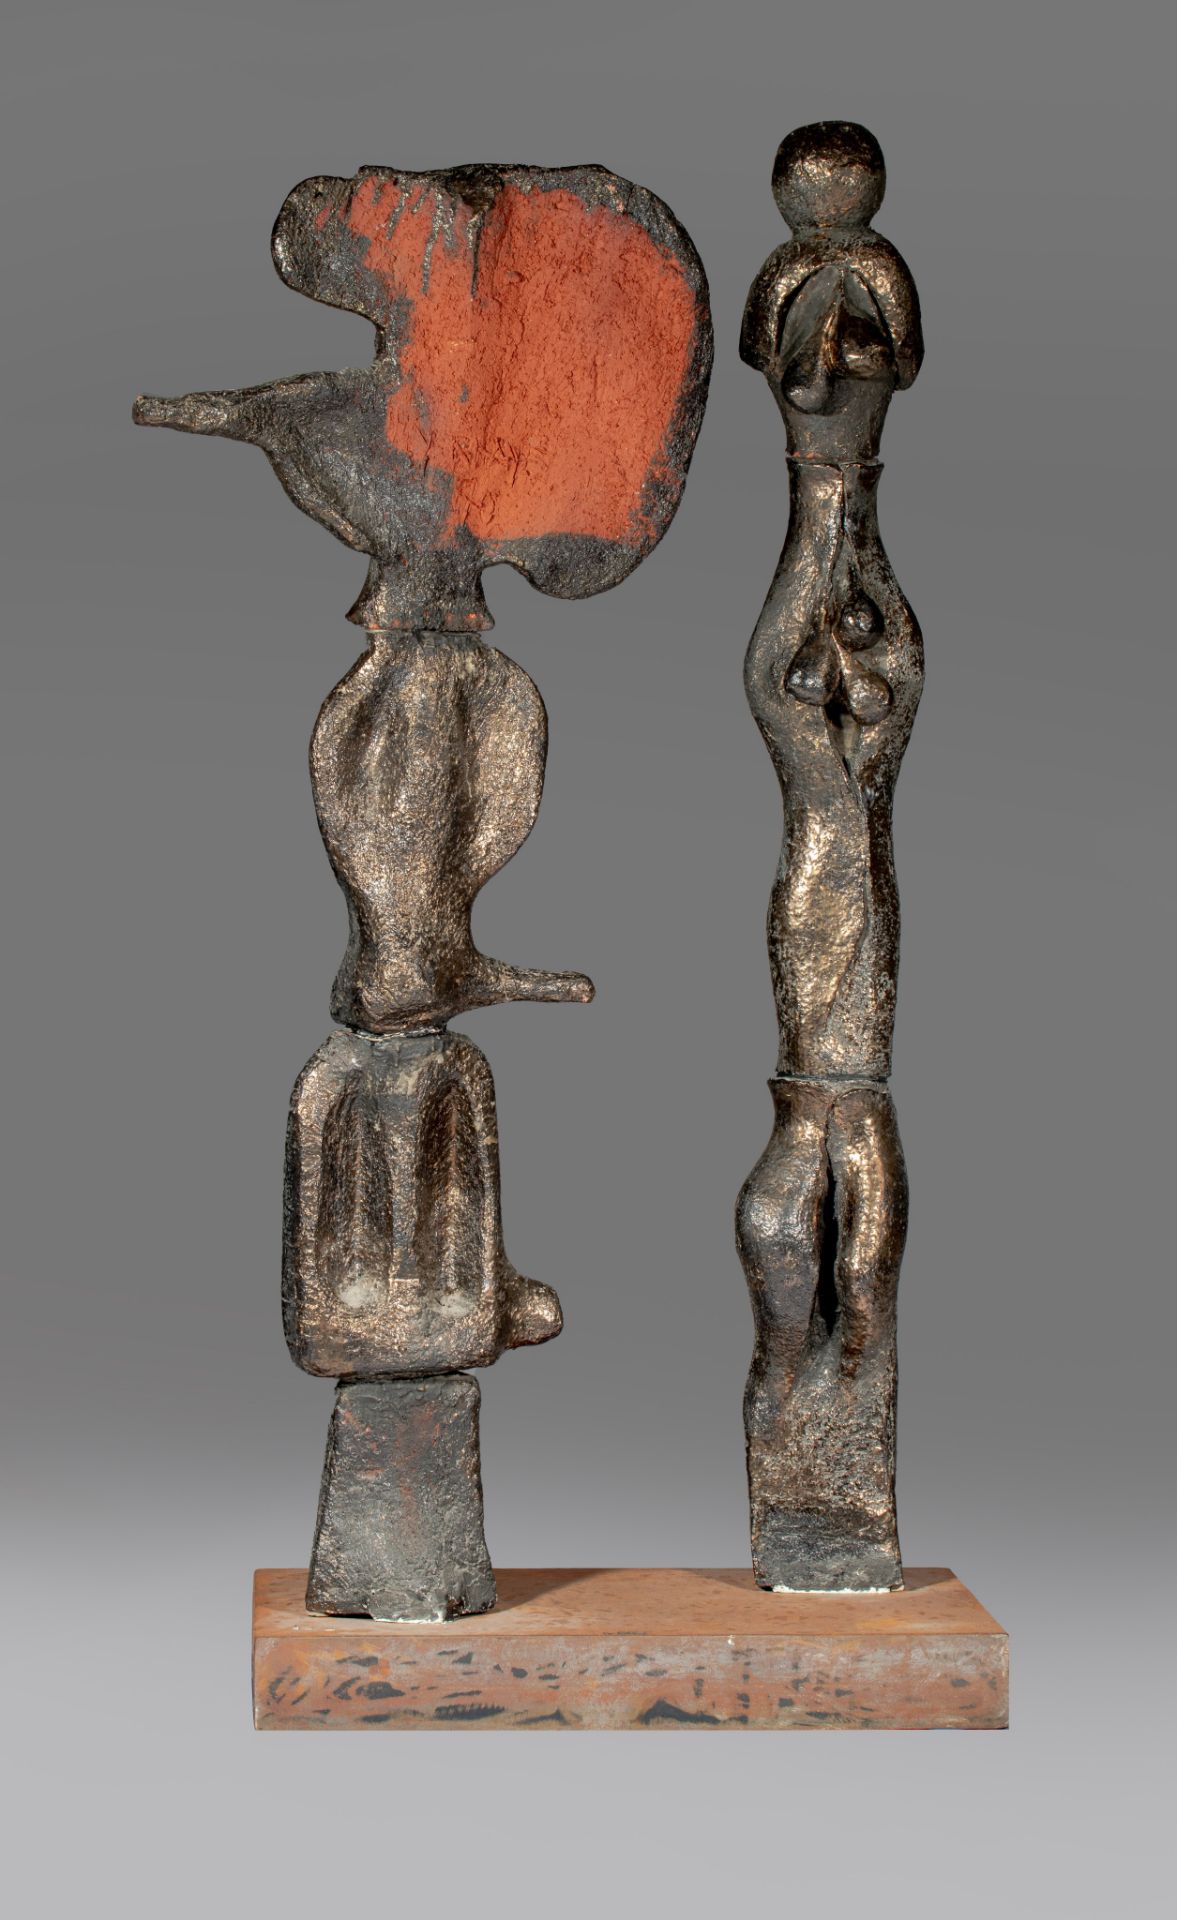 Yves Rhaye (1936-1995), 'Personnages Fantastiques', produced by Perignem, 1970, patinated terracotta - Image 2 of 8